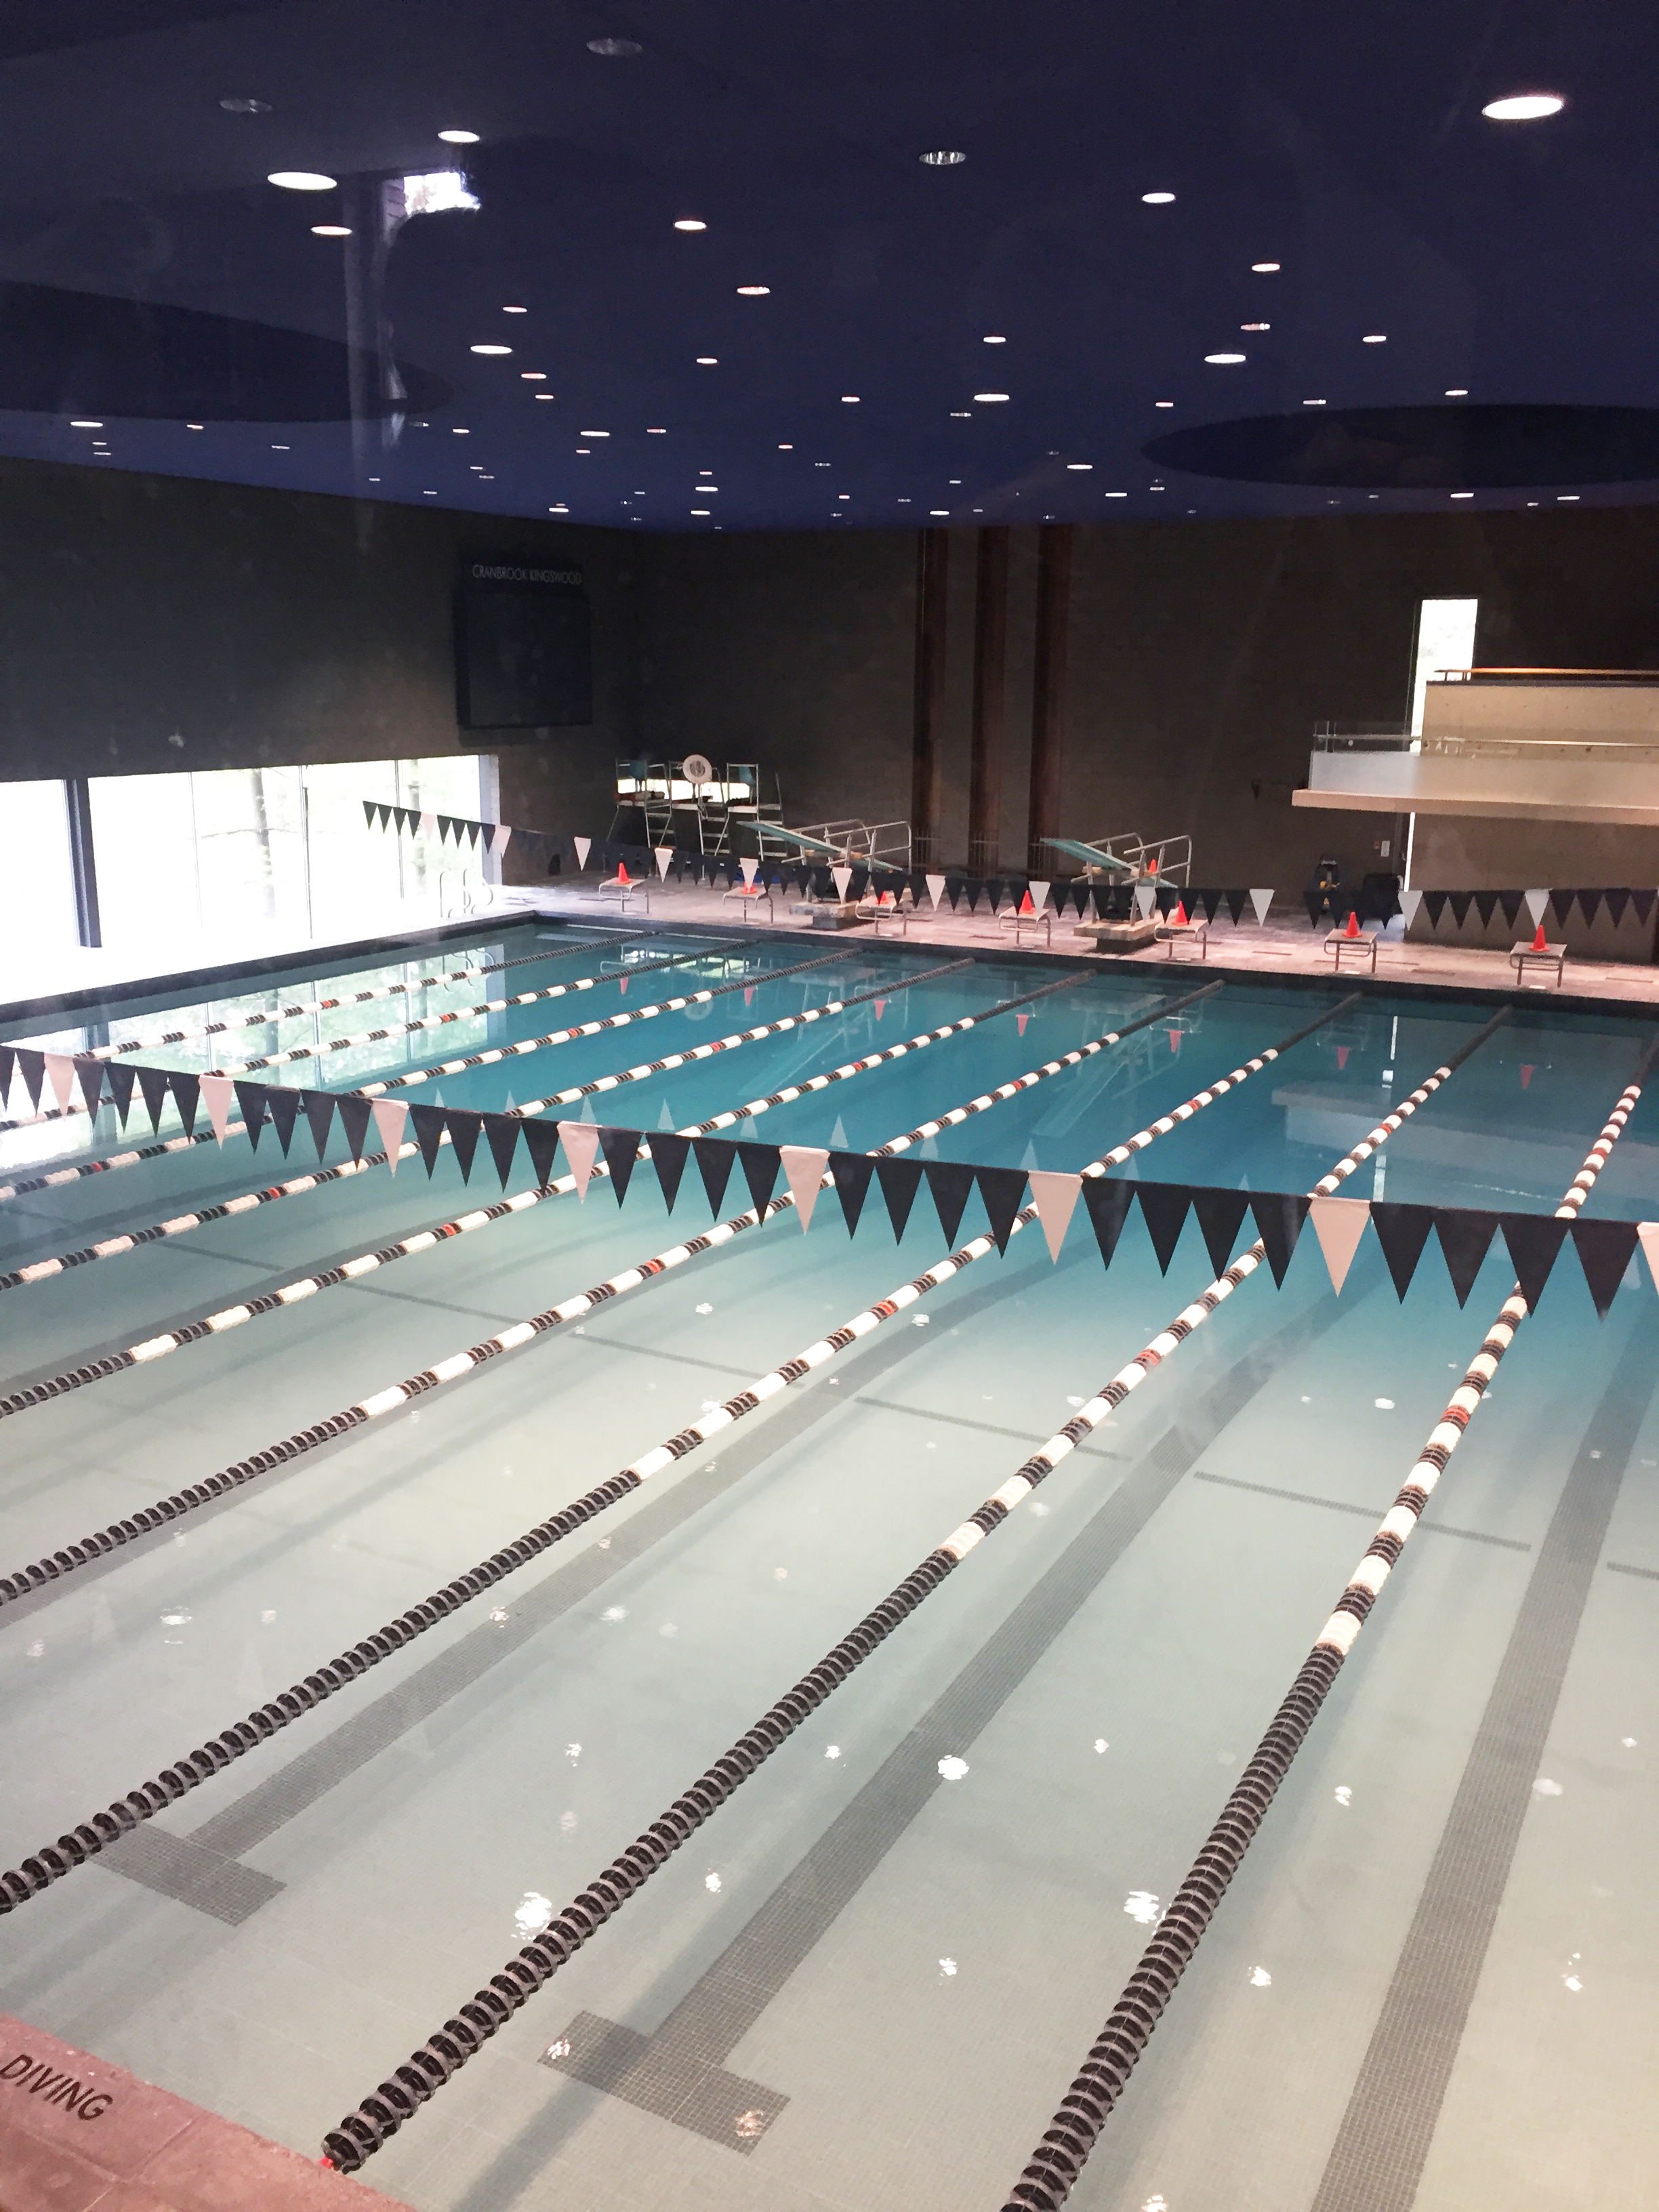  We stopped at the Cranbrook natatorium to sketch since it had interesting skylights. It was tough sketching them, though, since they're really only visible from the pool. 